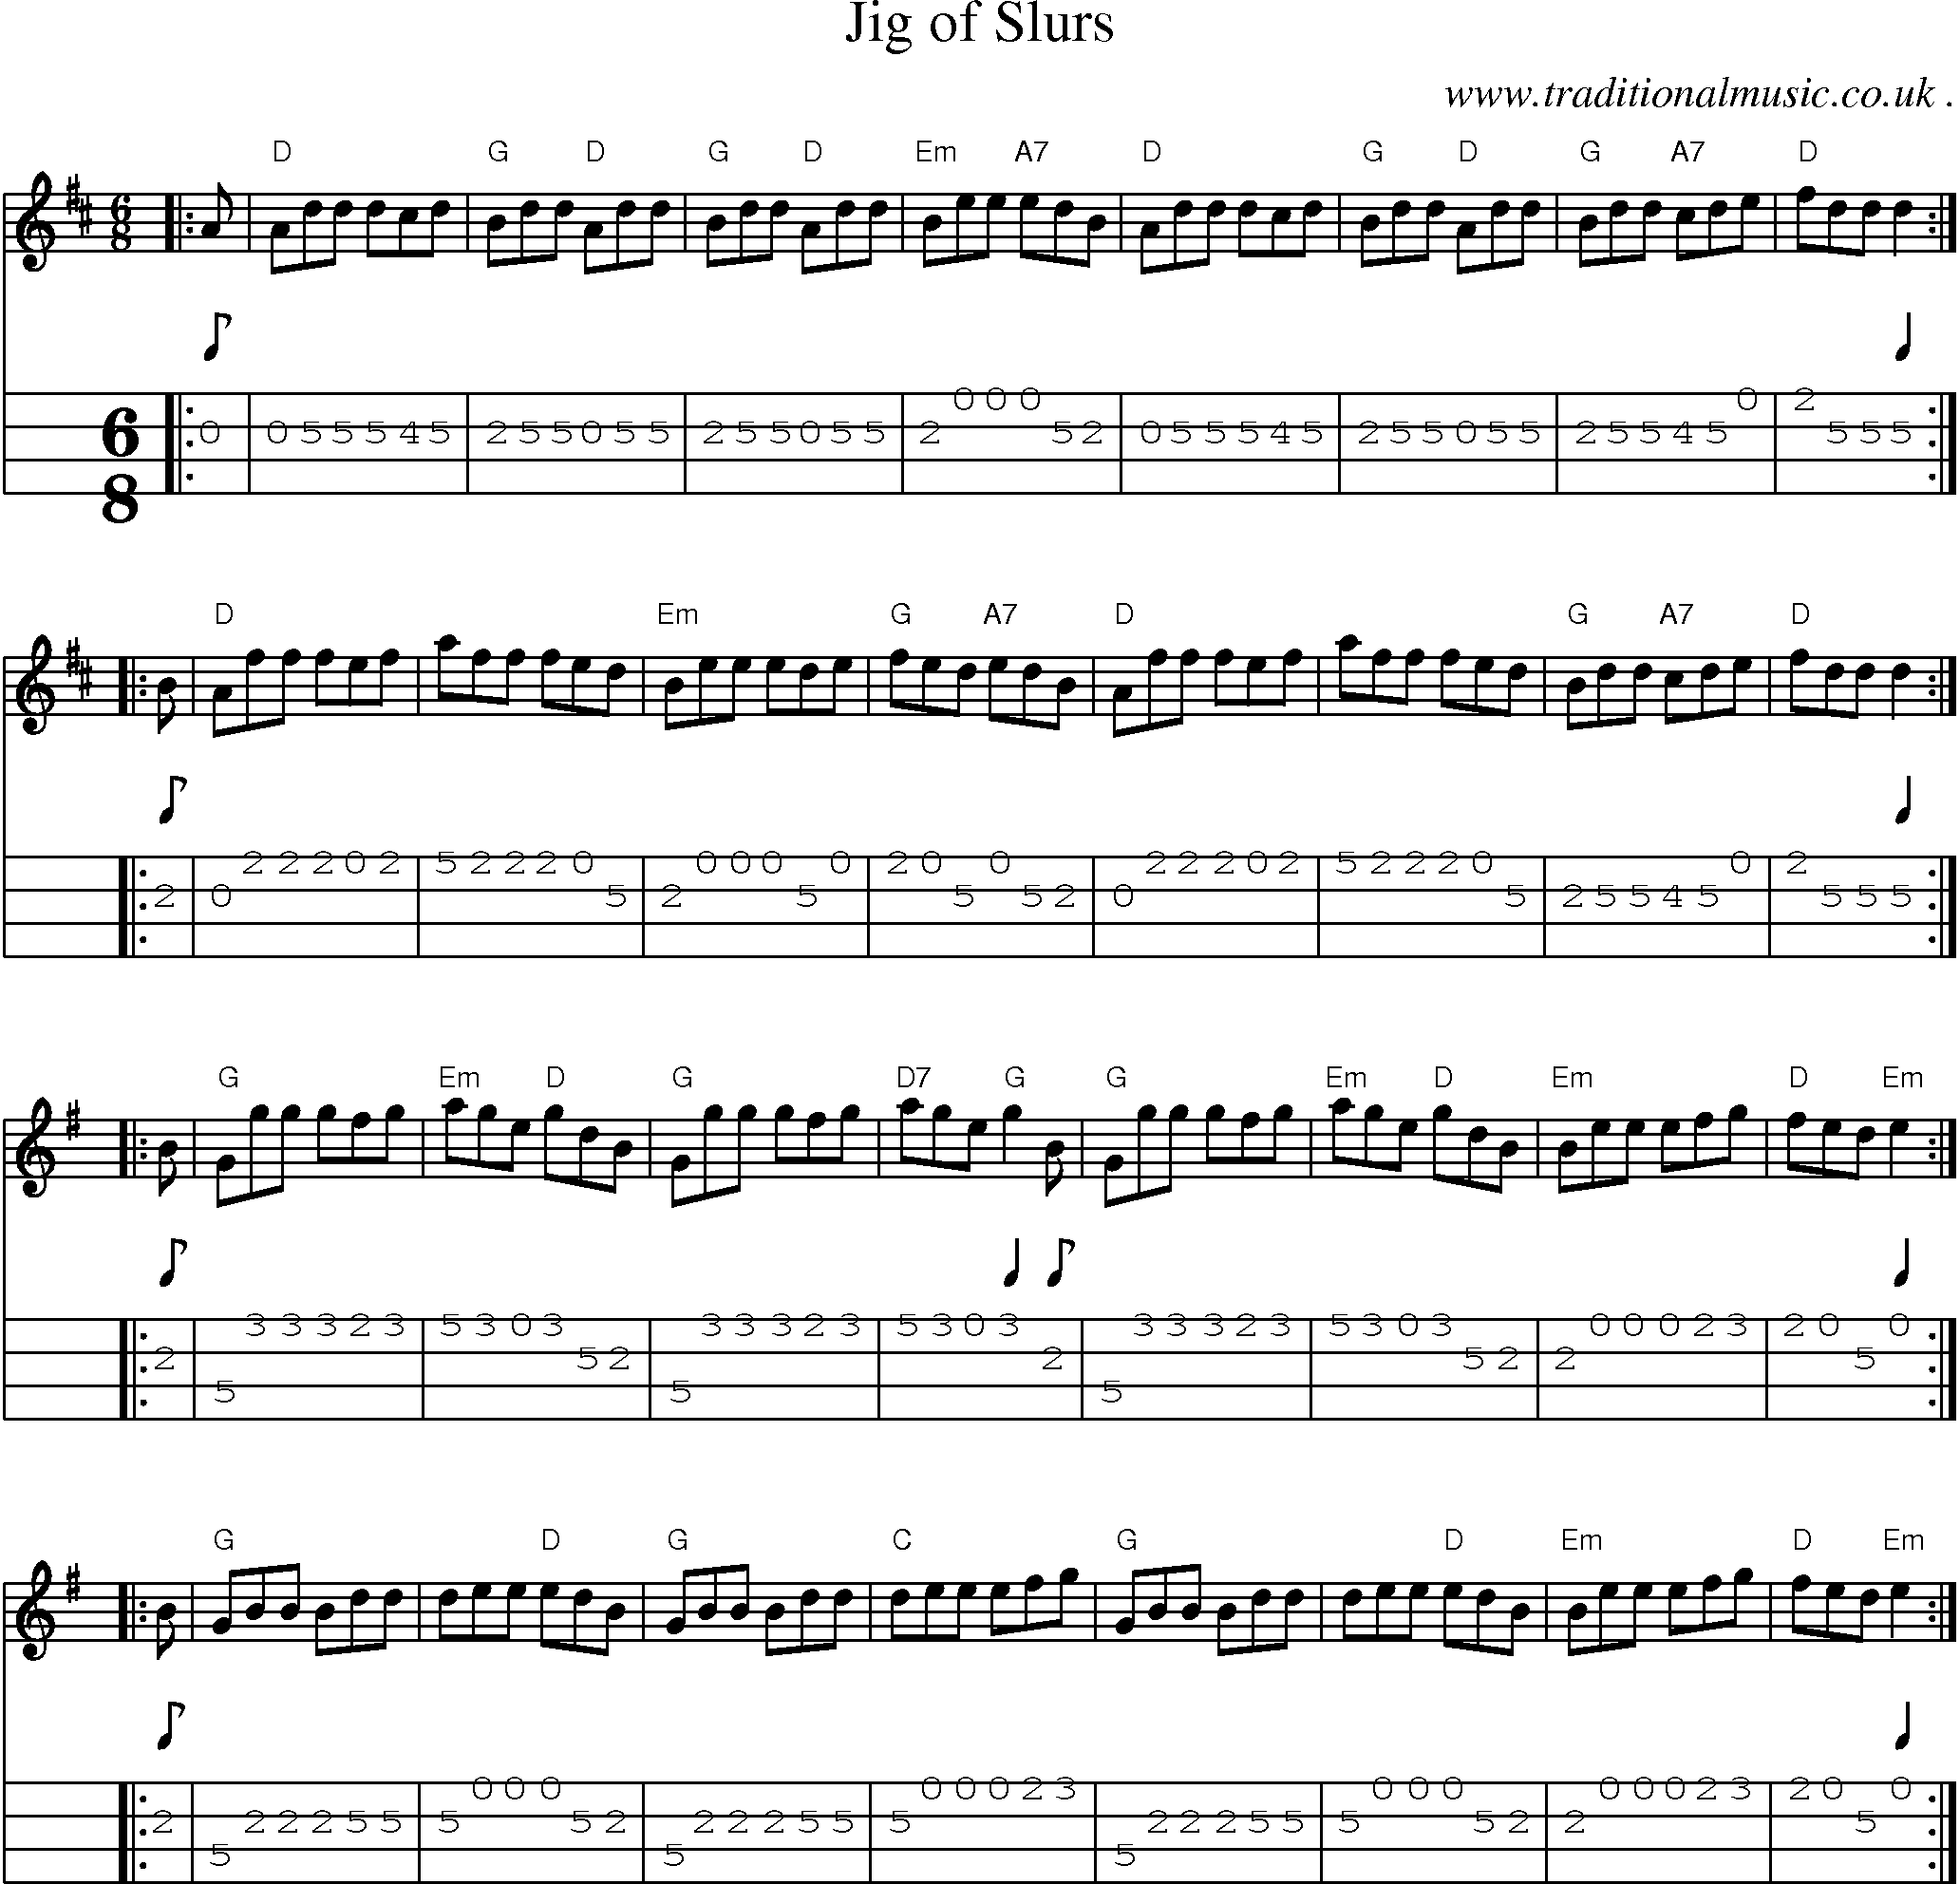 Sheet-music  score, Chords and Mandolin Tabs for Jig Of Slurs